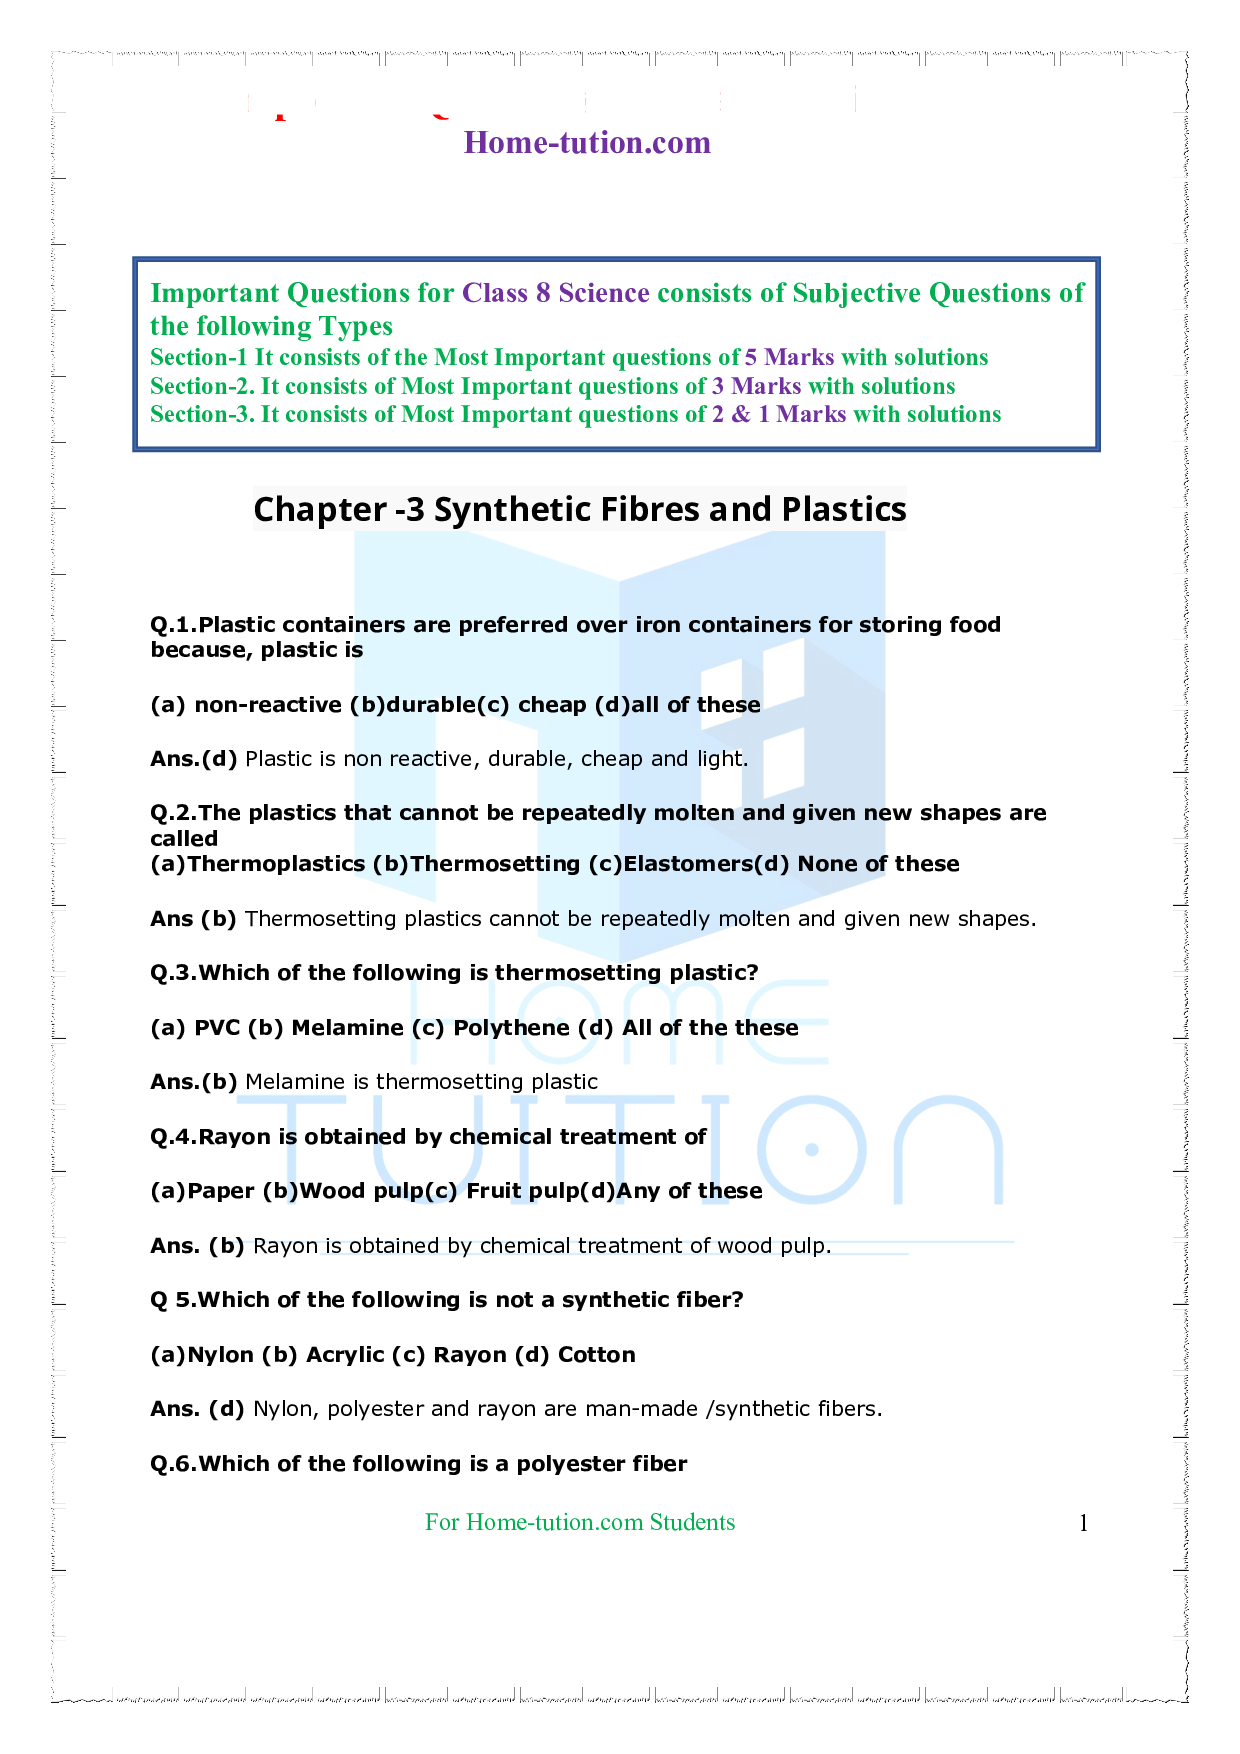 Important Questions for Chapter -3 Synthetic Fibres and Plastics